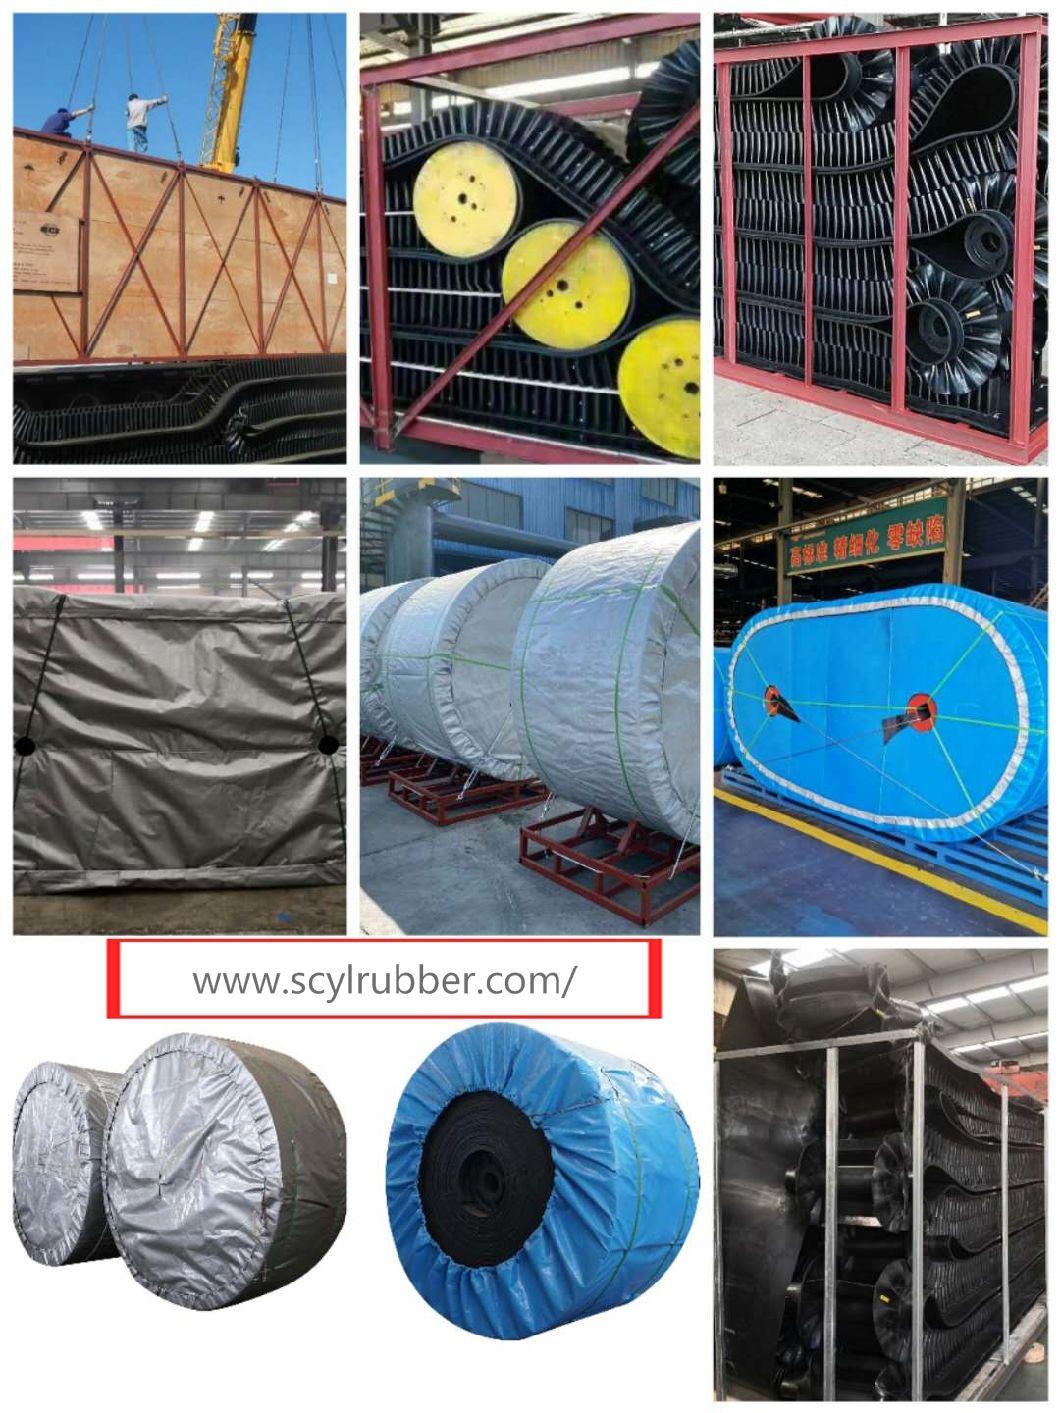 SGS Certificated China Factory Supply Rubber Conveyor Belt for Power Coal Mining Crusher Plants